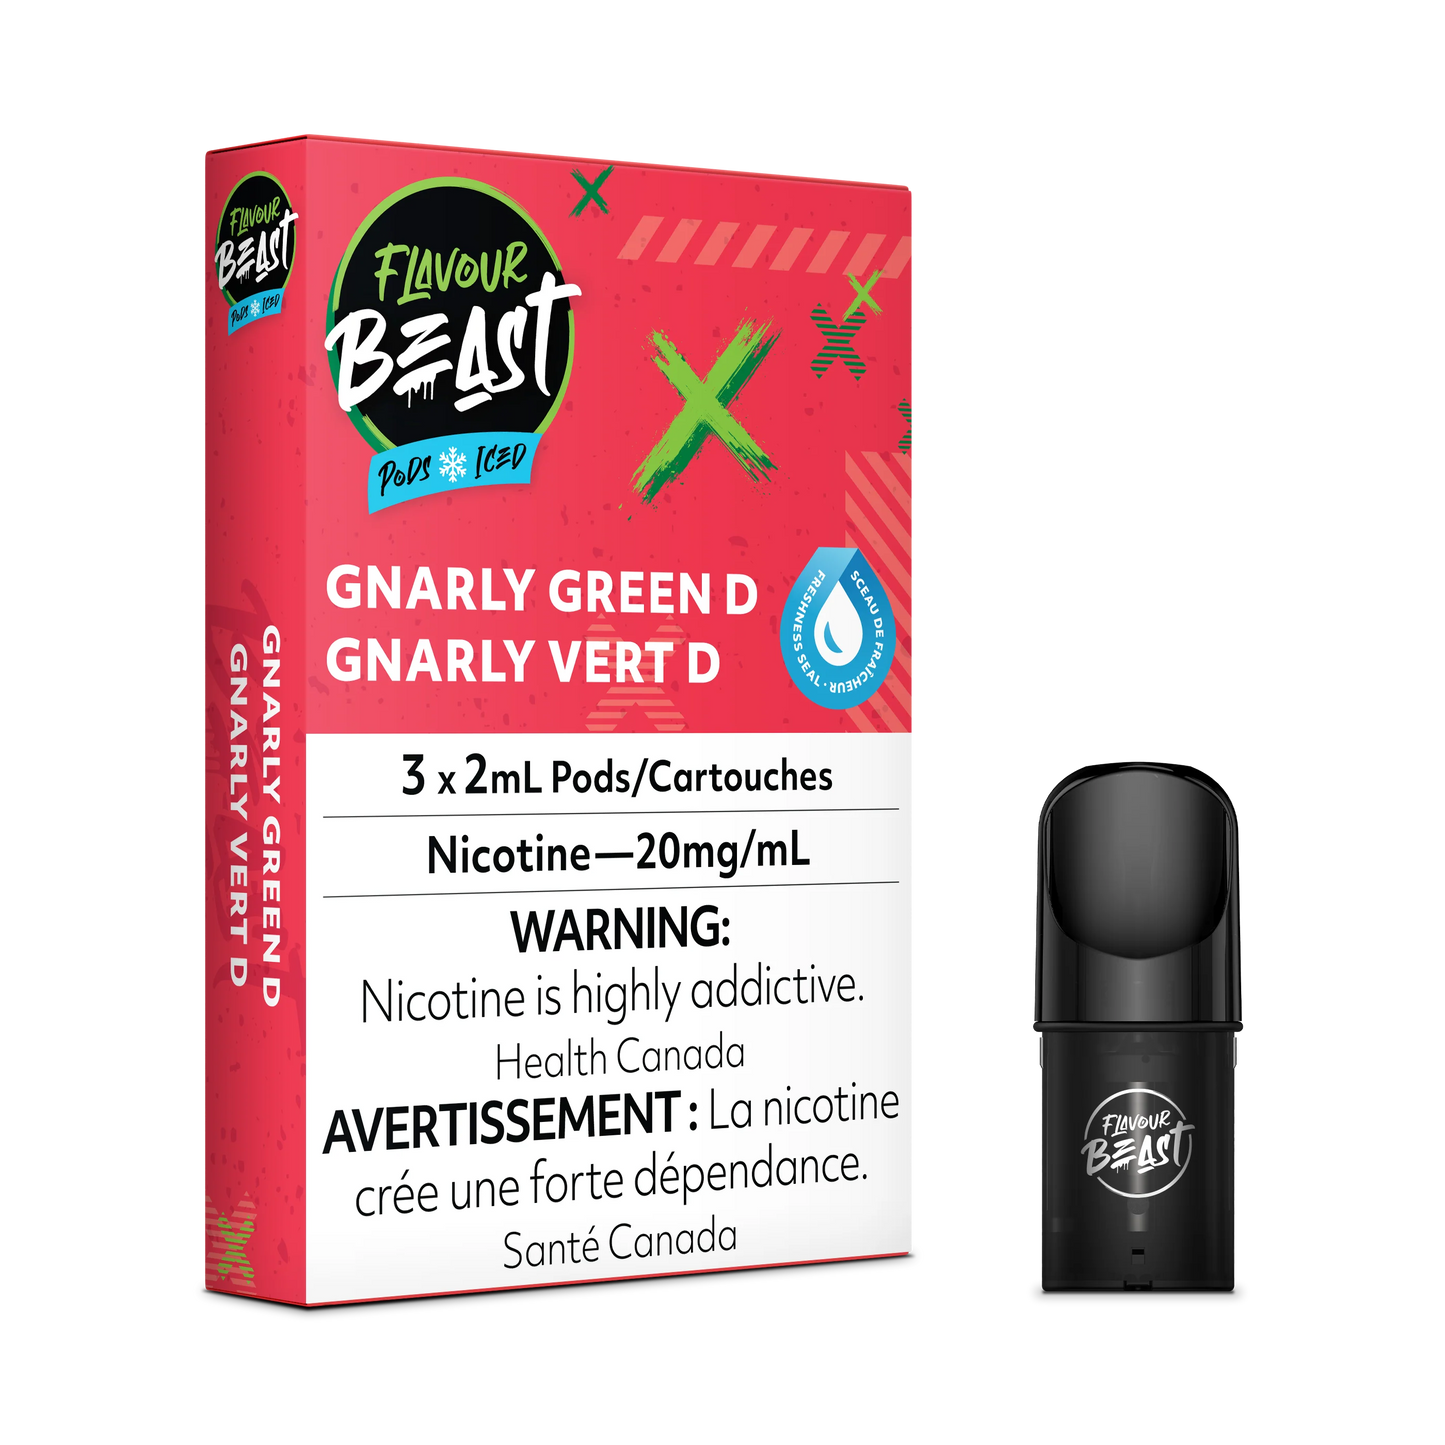 Flavour Beast Pods - Gnarly Green D Iced (20mg/mL) (Vape tax included)